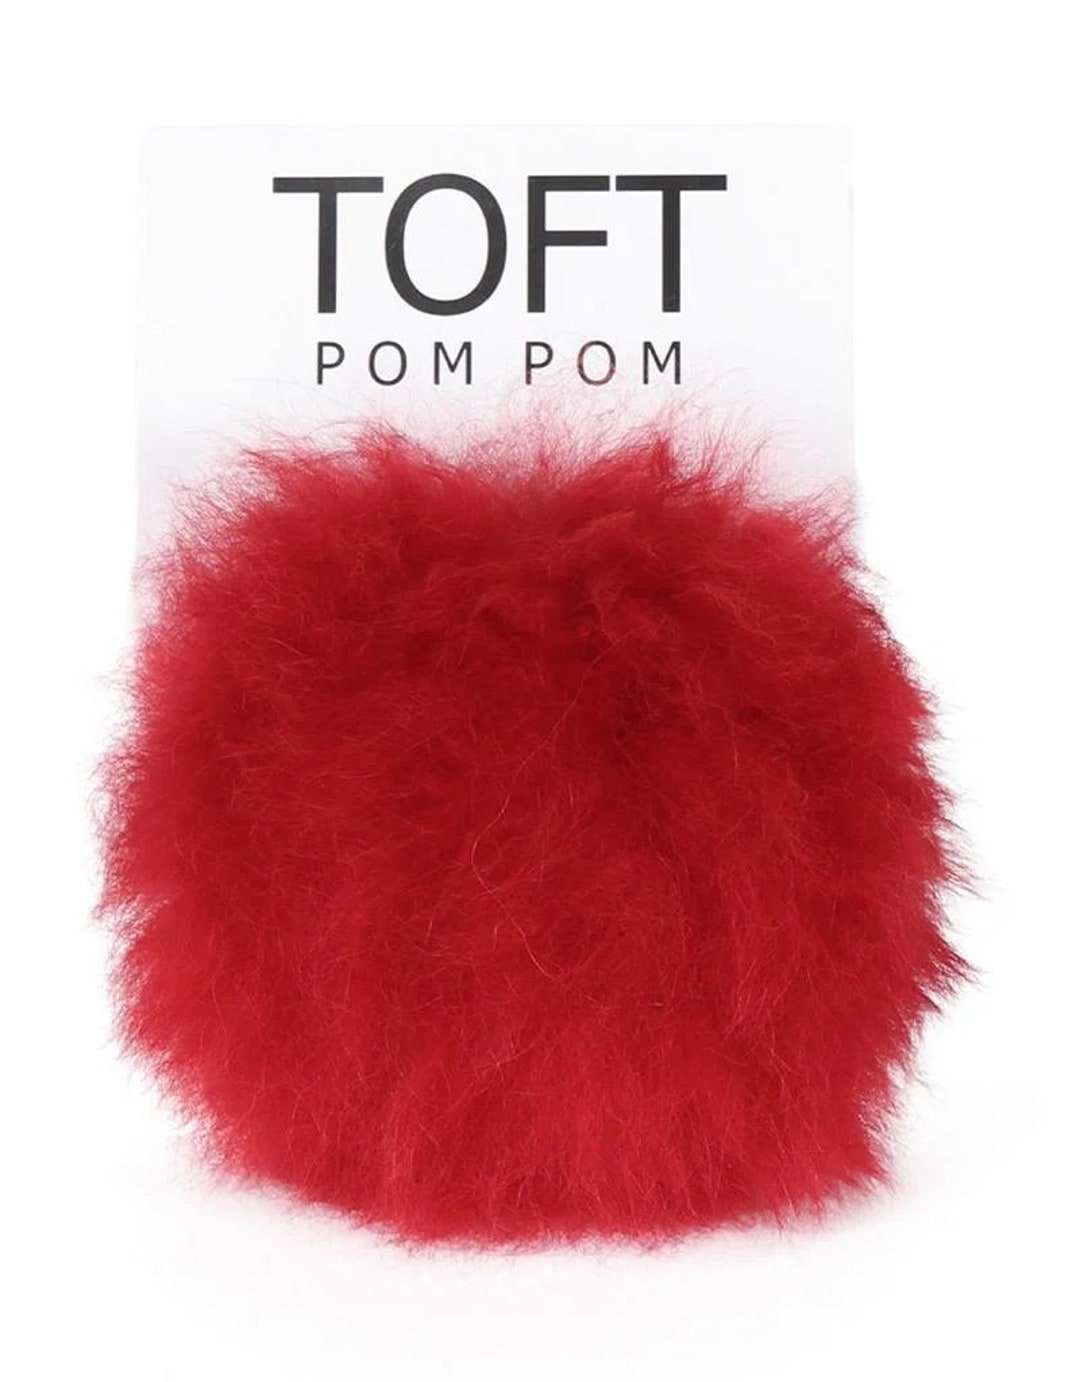 Package of 90 Fluffy Red Craft Pom Poms 1.5 in Diameter for